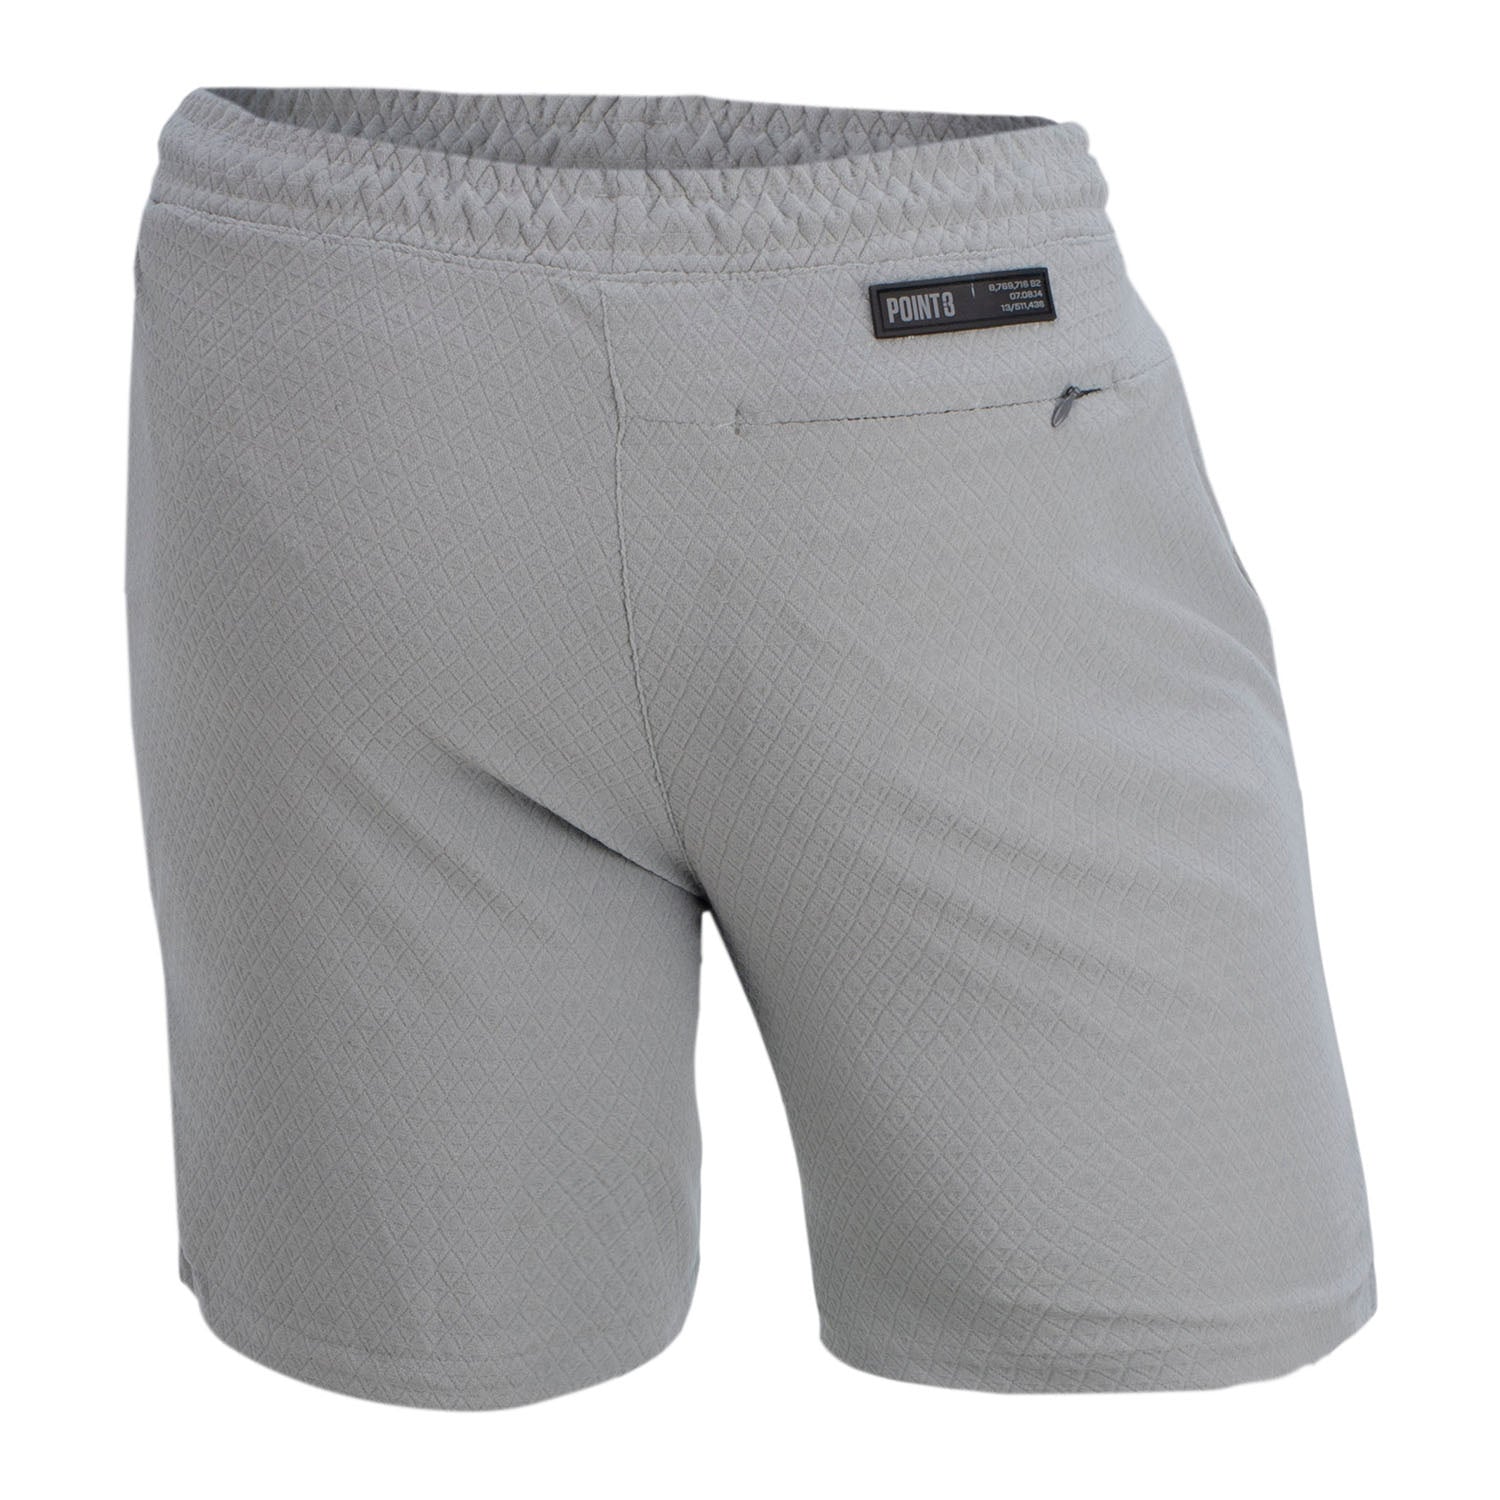 StarCraft POINT3 Grey Shorts - Back View